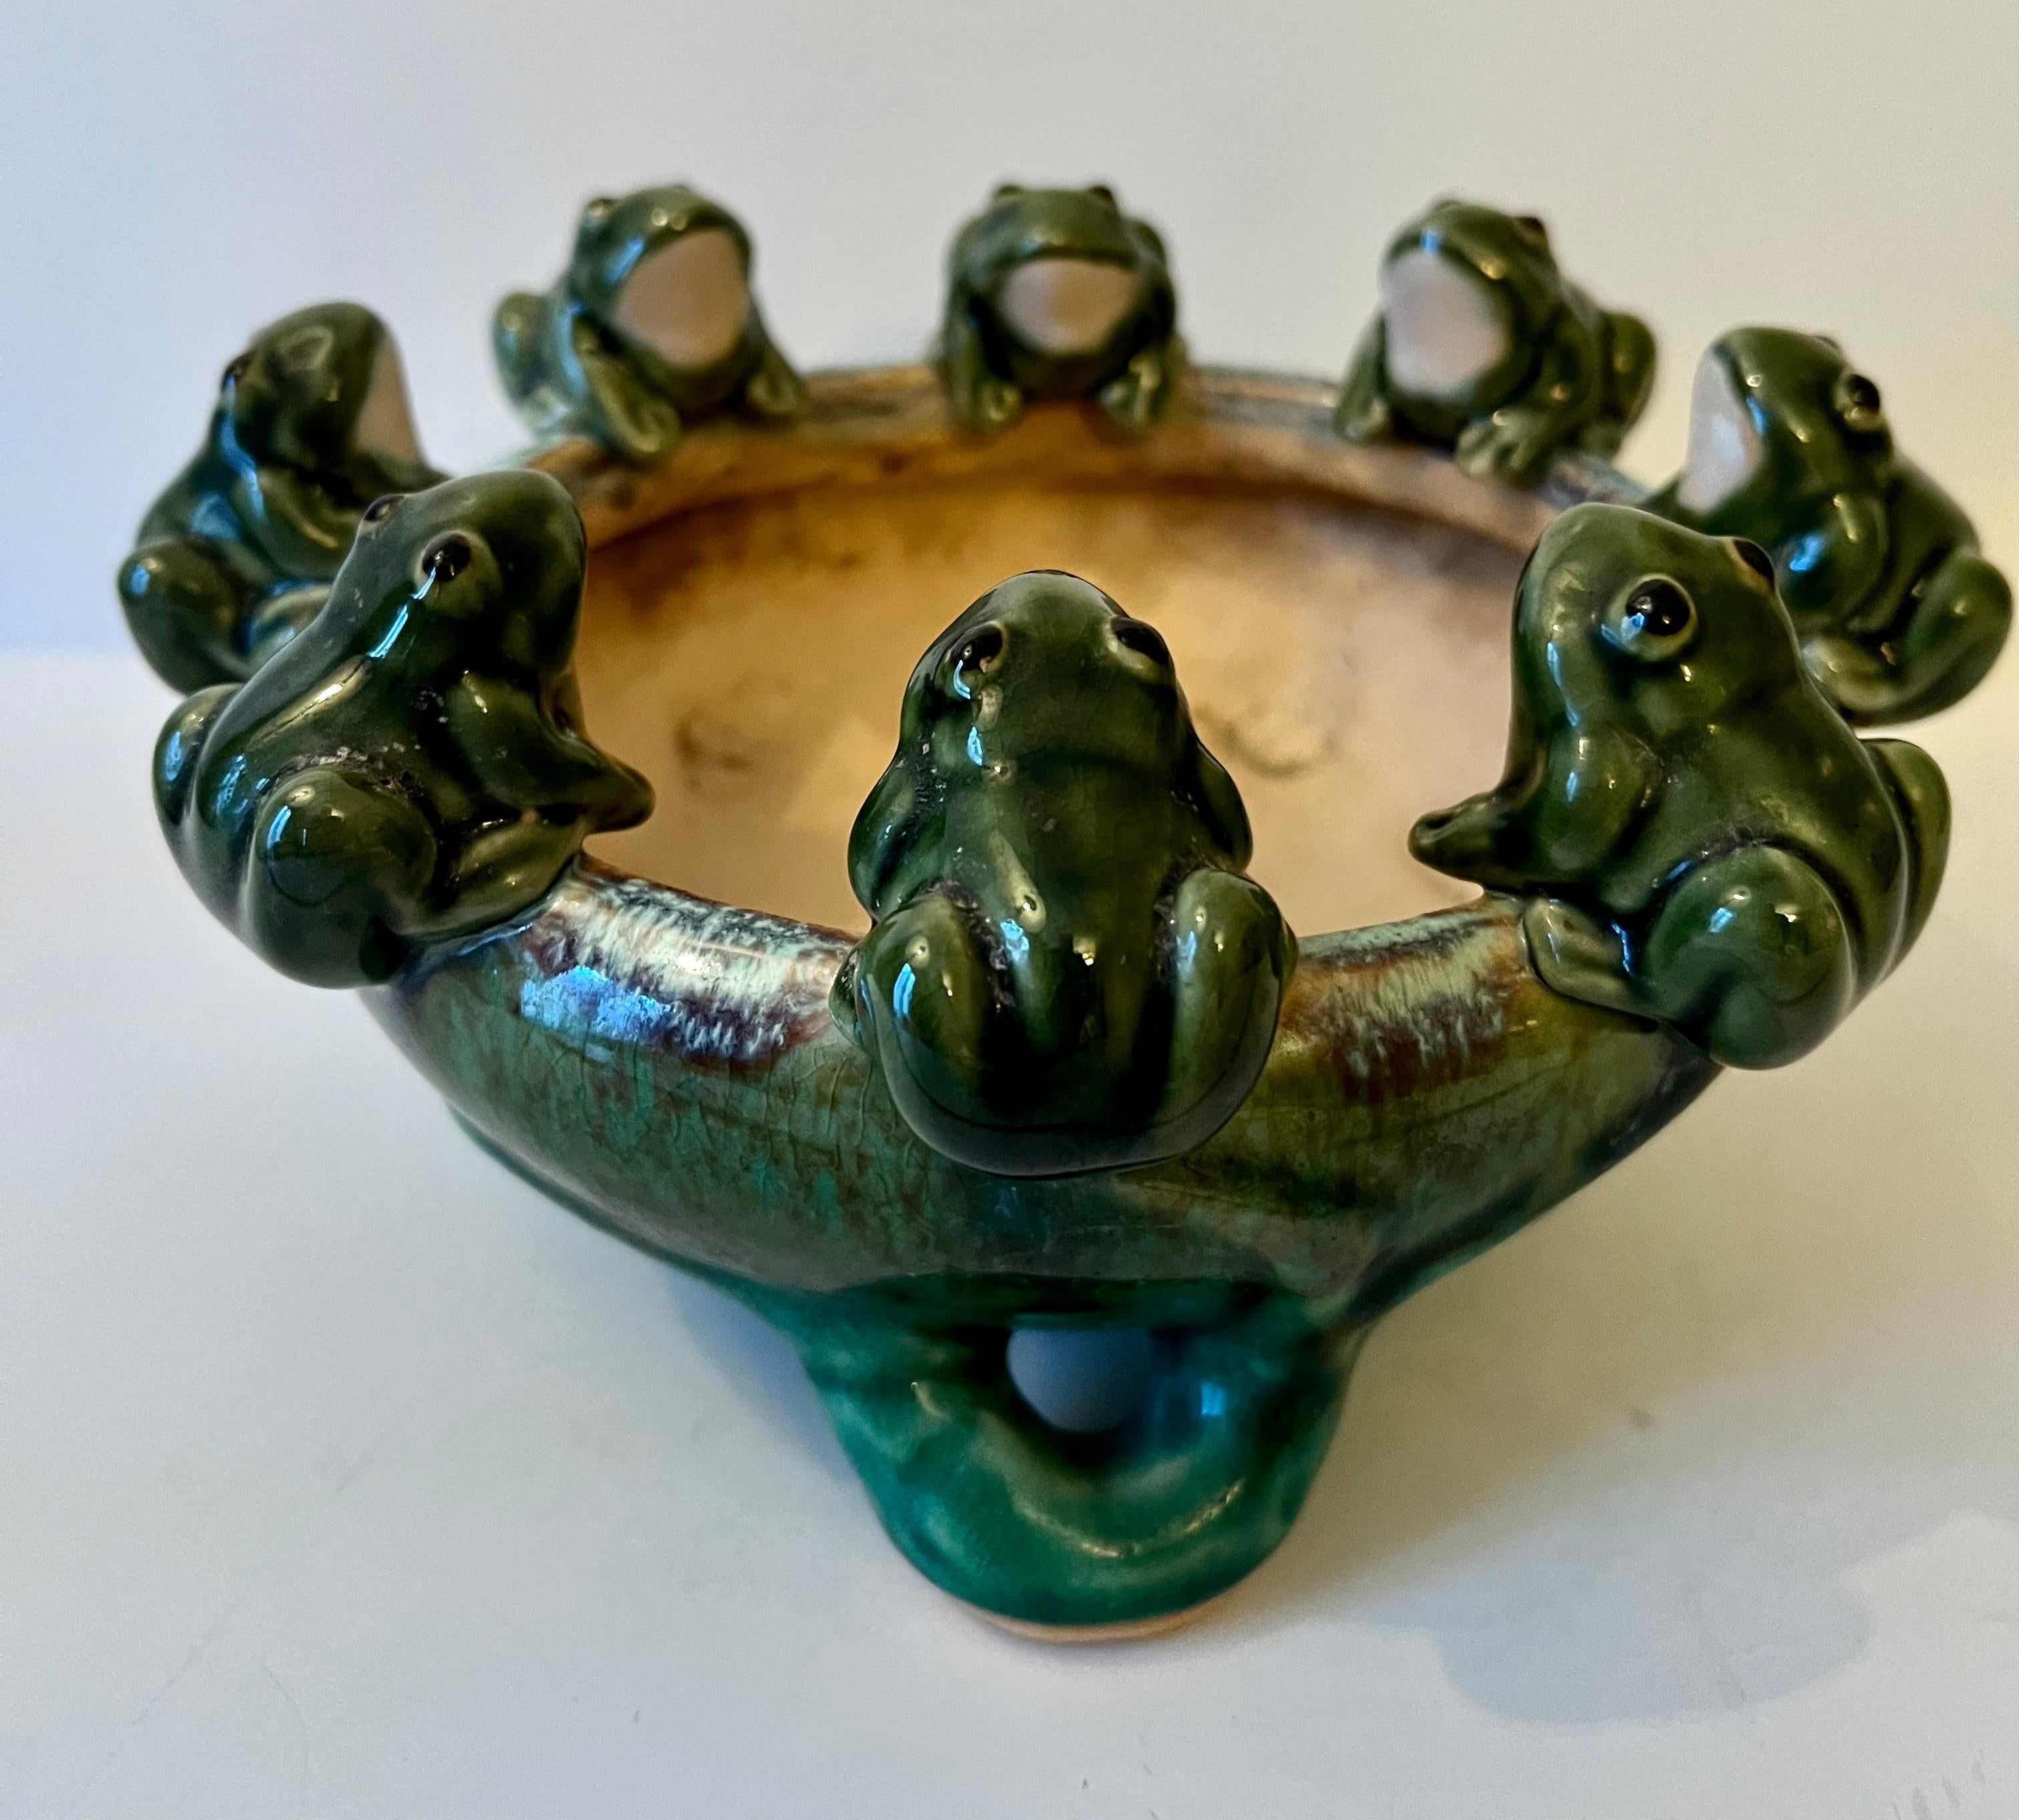 A delightful planter or jardiniere with frogs surrounding the opening.  The piece has small open feet.  Could be used for plants, arrangements or to float flowers.  Could be used as a candy dish as well.  A wonderful compliment to any garden or